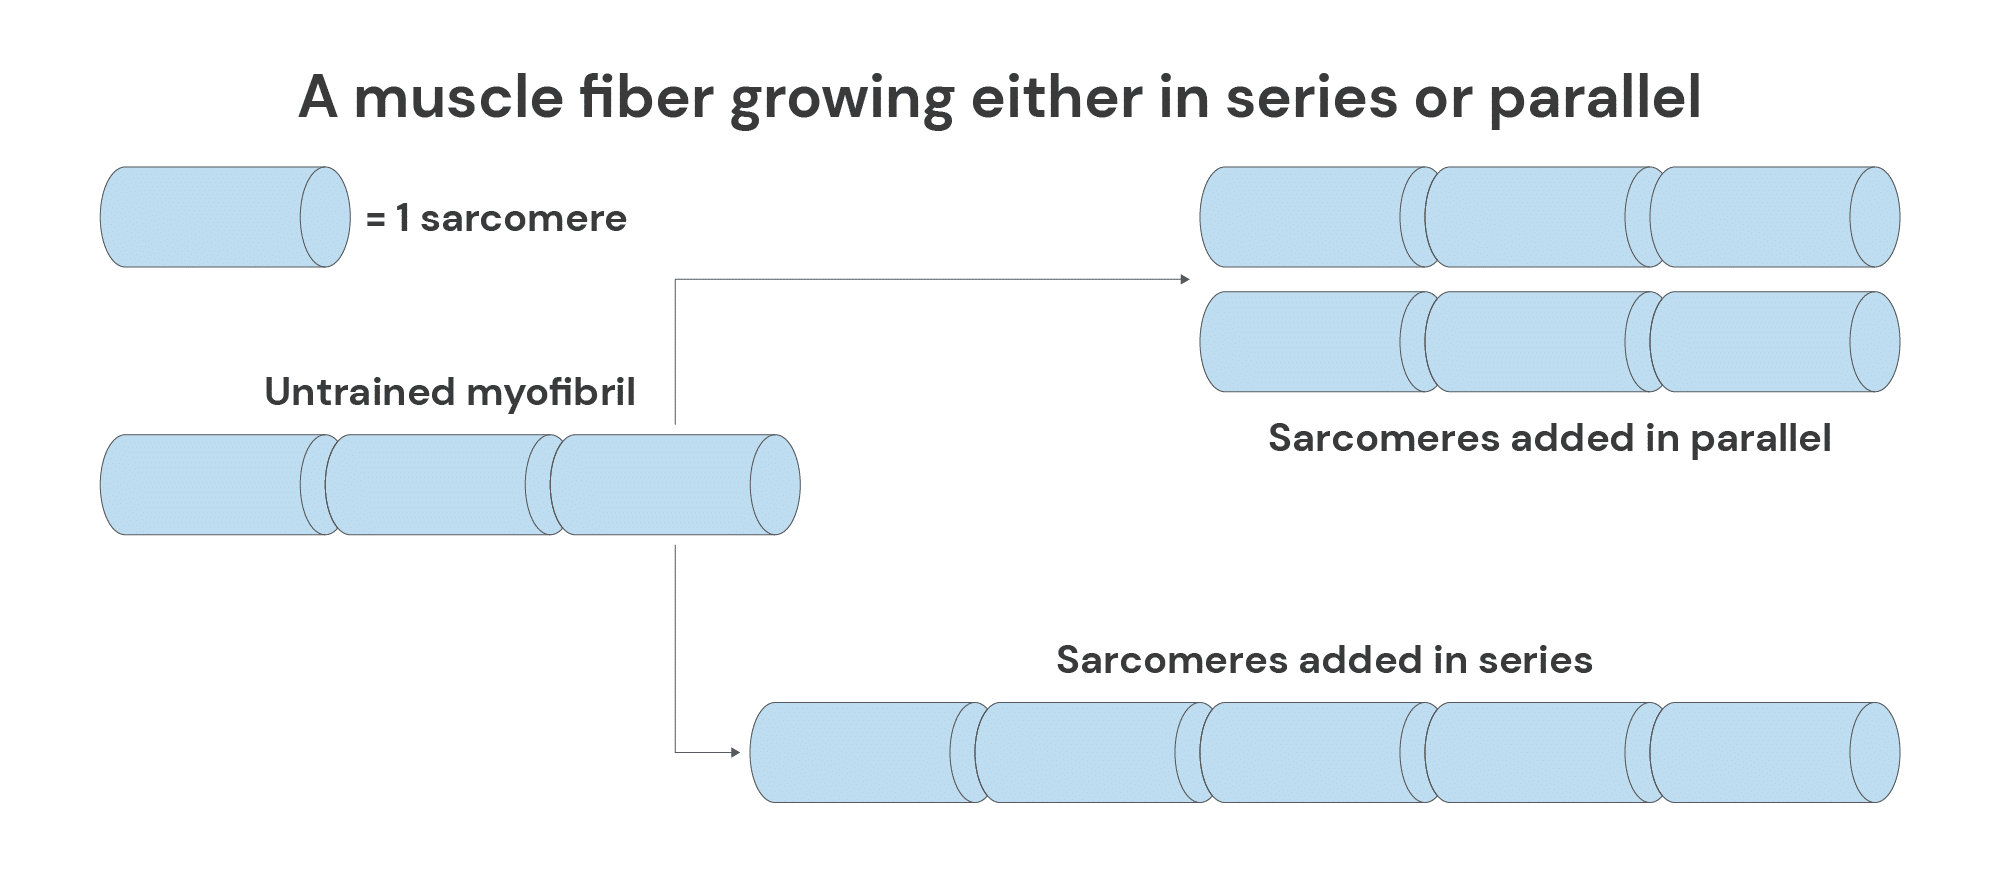 A muscle fiber growing either in series or parallel